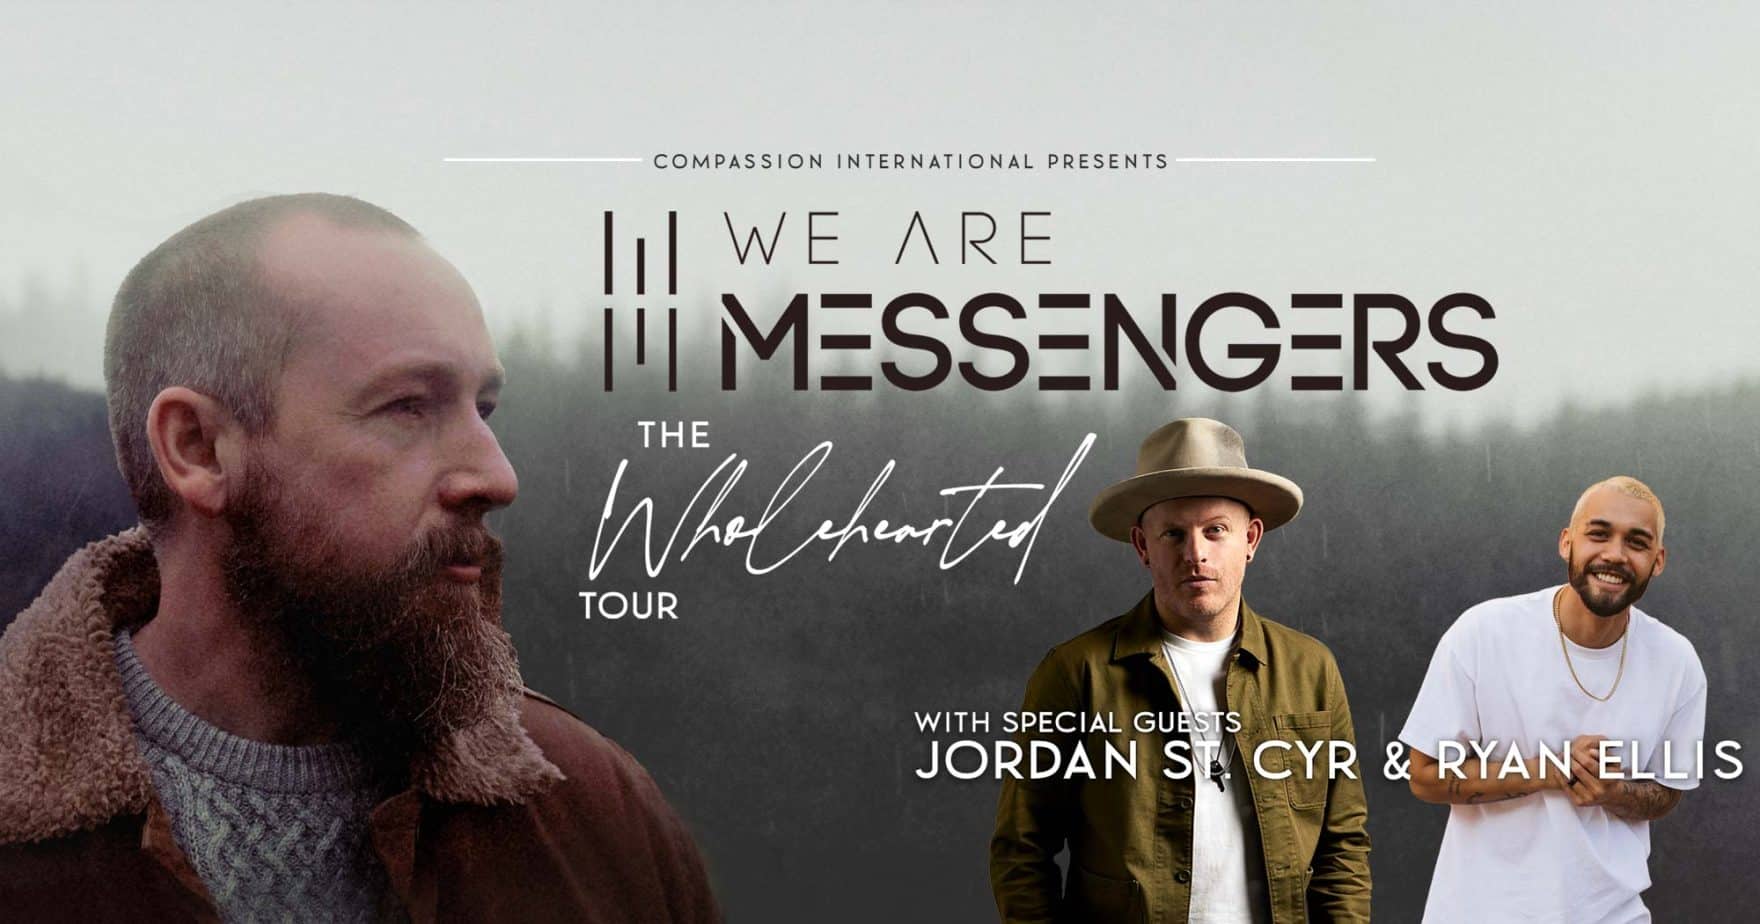 We Are Messengers to Bring The Wholehearted Tour to Regent University.